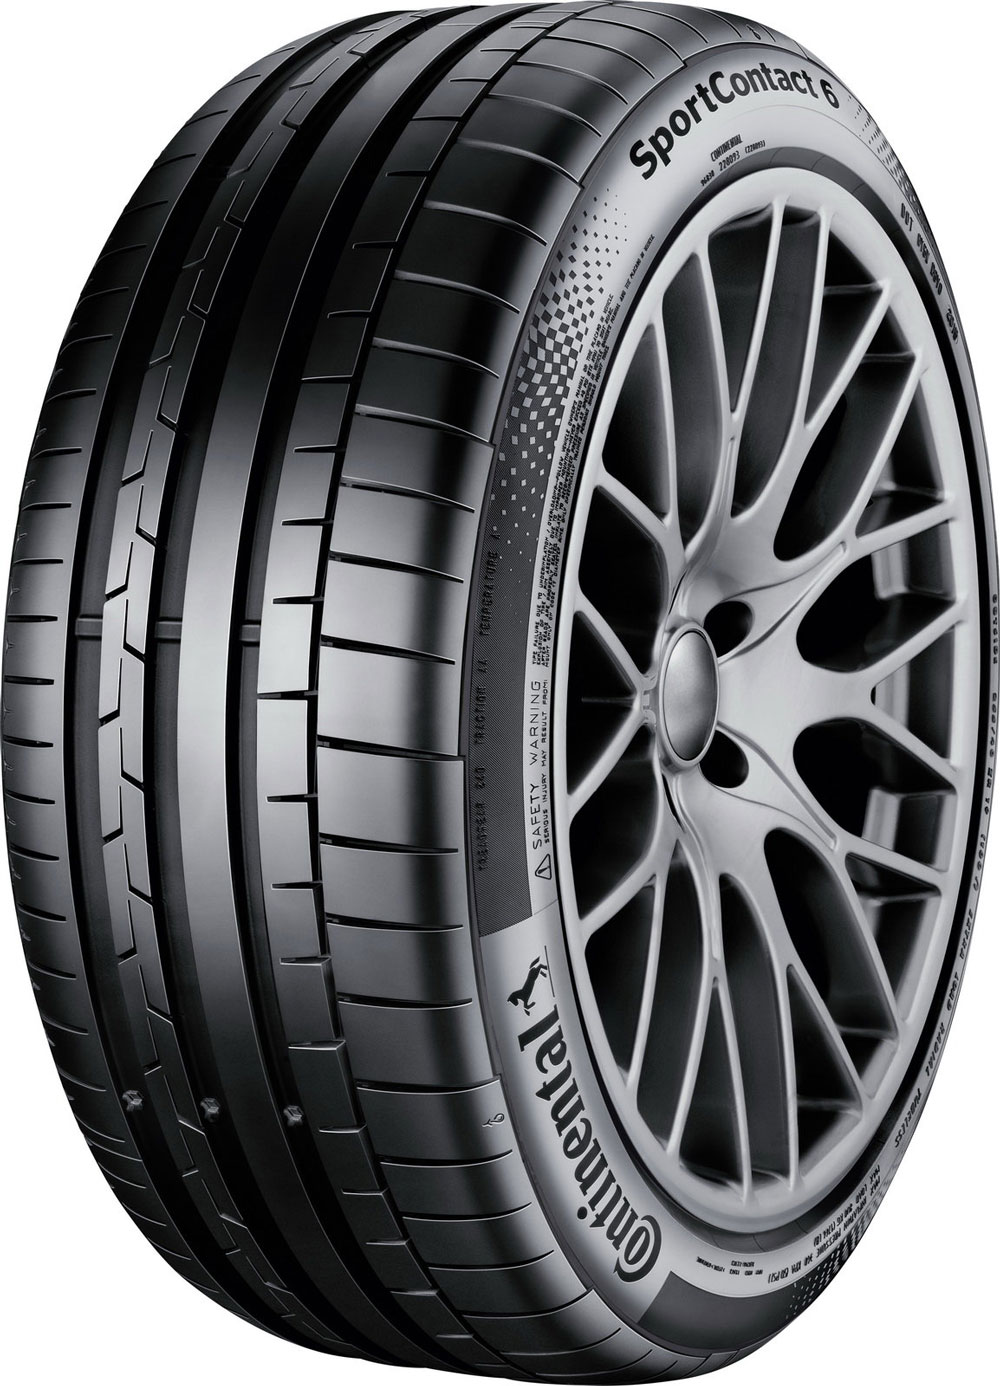 Гуми за кола CONTINENTAL SPORT CONTACT 6 XL 285/35 R19 103Y